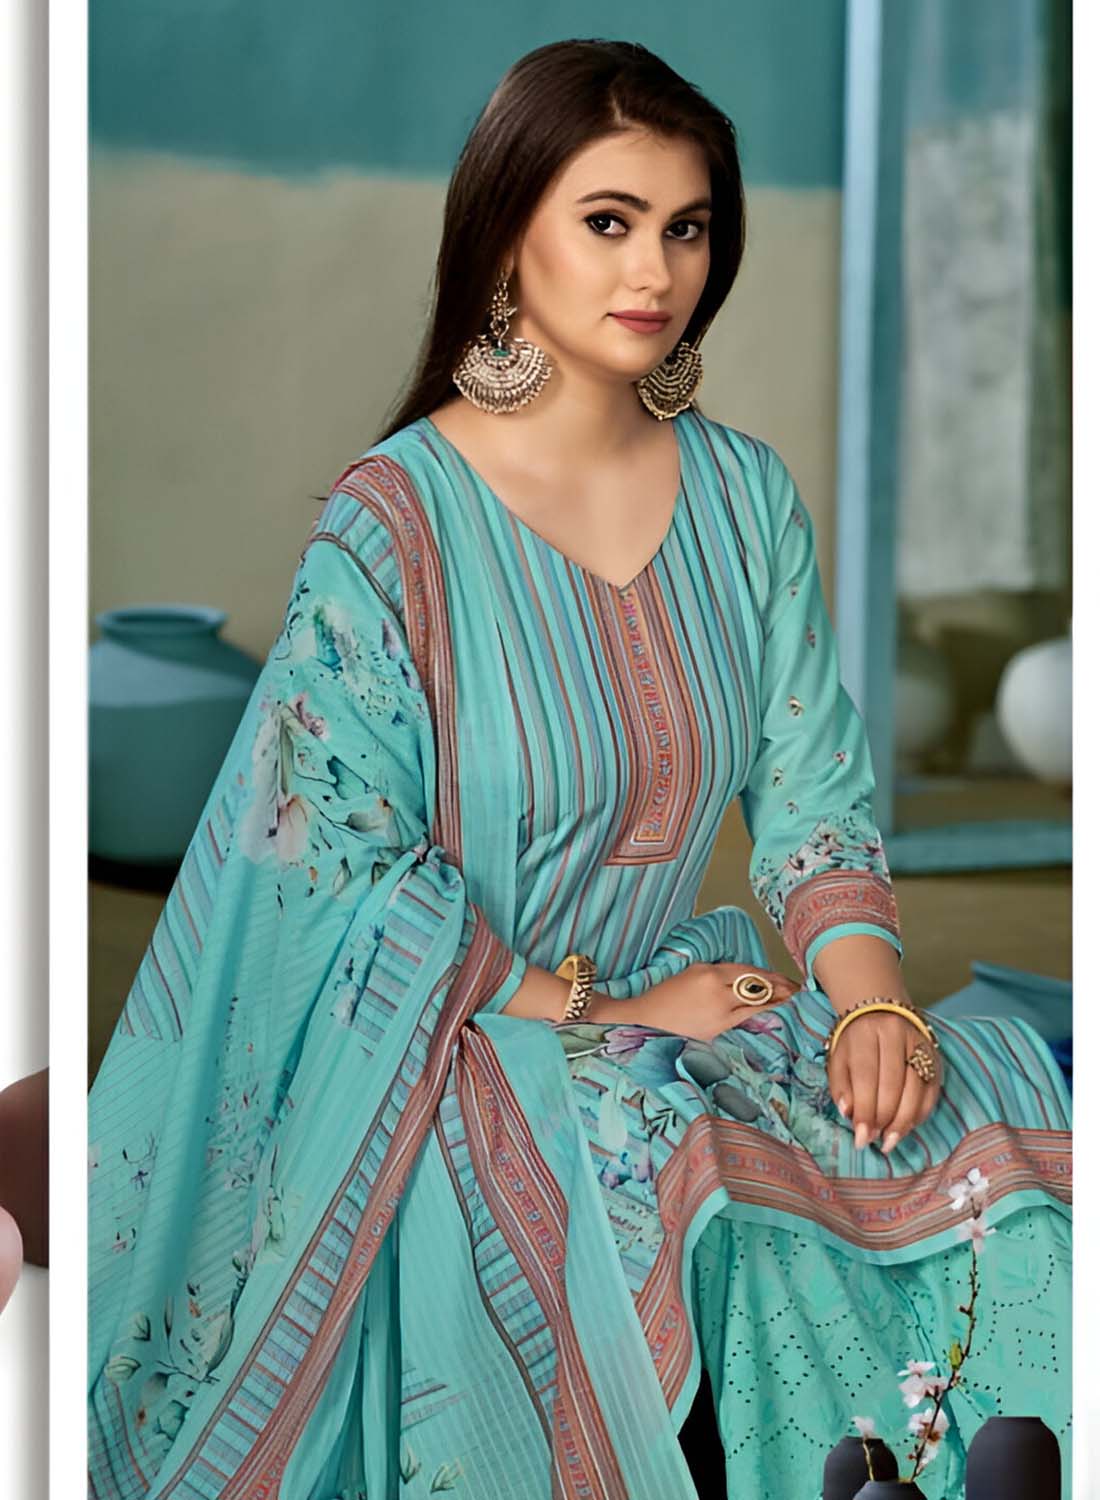 Rivaa Pure Cotton Printed Unstitched Suit Dress Material with Dupatta